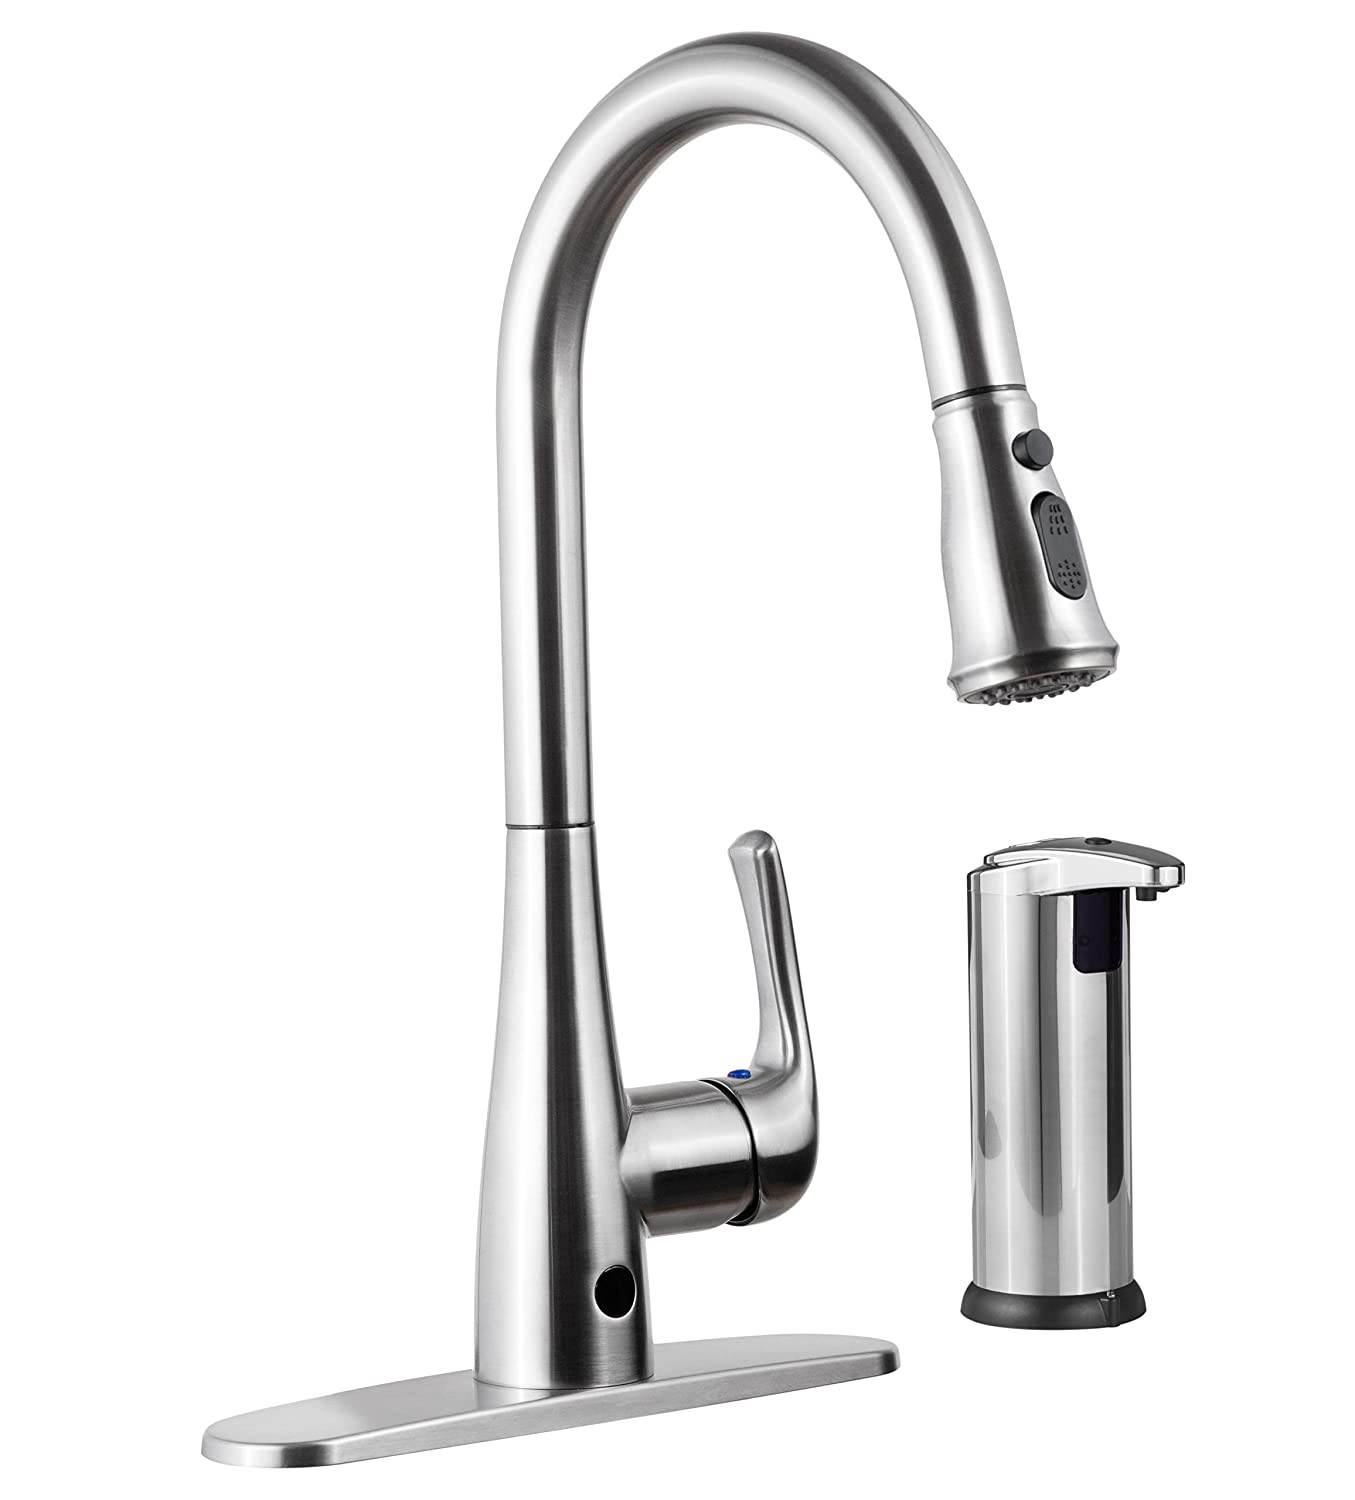 Small Kitchen Faucet Lovely the 10 Best Small Kitchen Faucet with Hand soap Home Tech